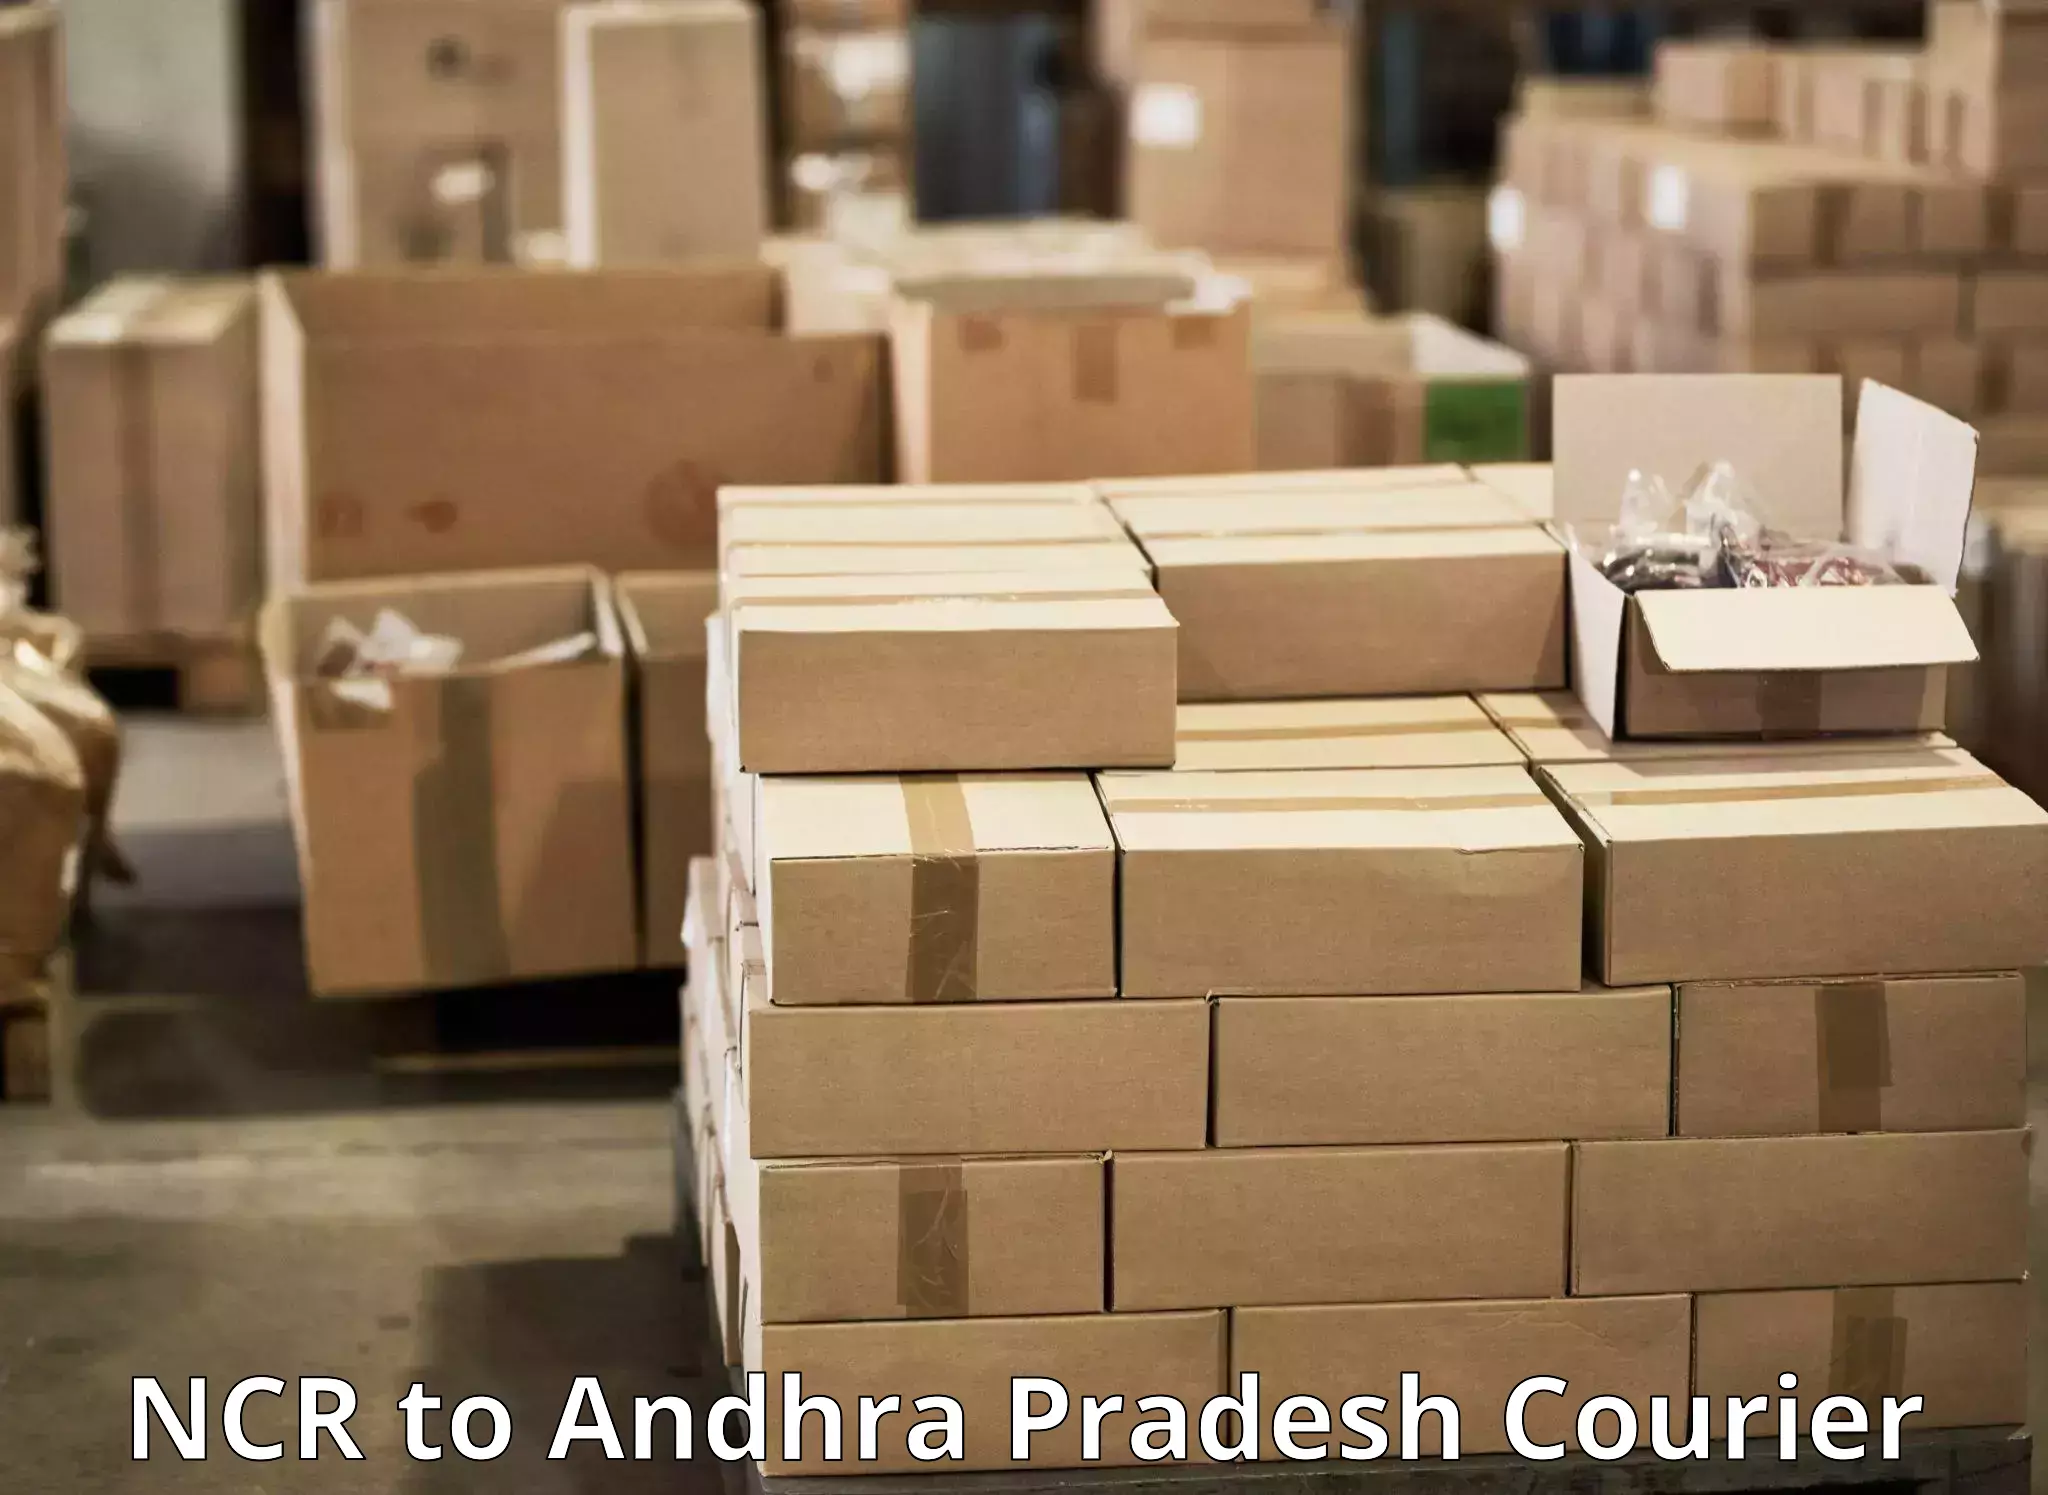 Parcel service for businesses NCR to Pulivendula